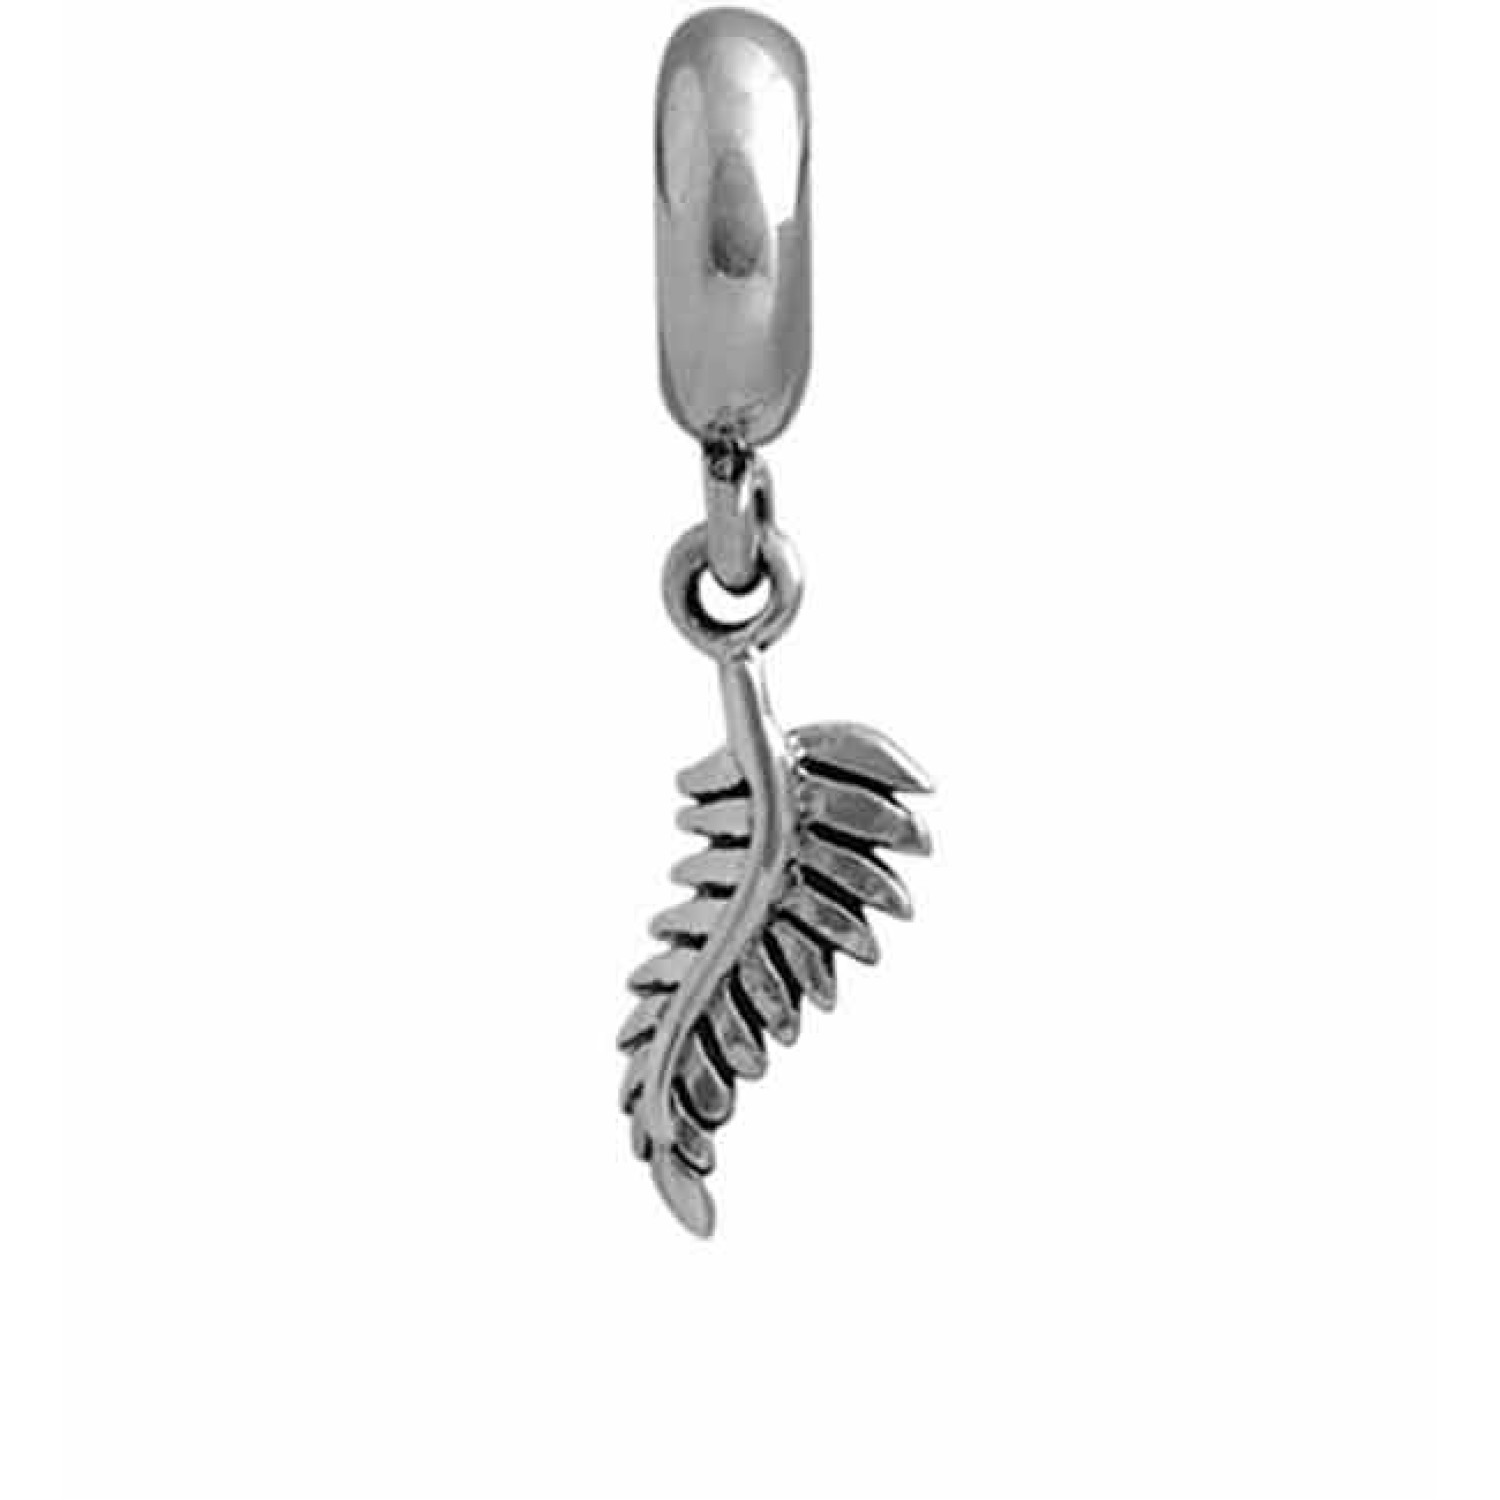 LKD014 Evolve Aotearoa Fern (Dedication). The unofficial symbol of New Zealand, the silver fern evokes a sense of pride, admiration and dedication towards beautiful Aotearoa.  The sculptural beauty of our native fern’s foliage, with its striking silve @ch